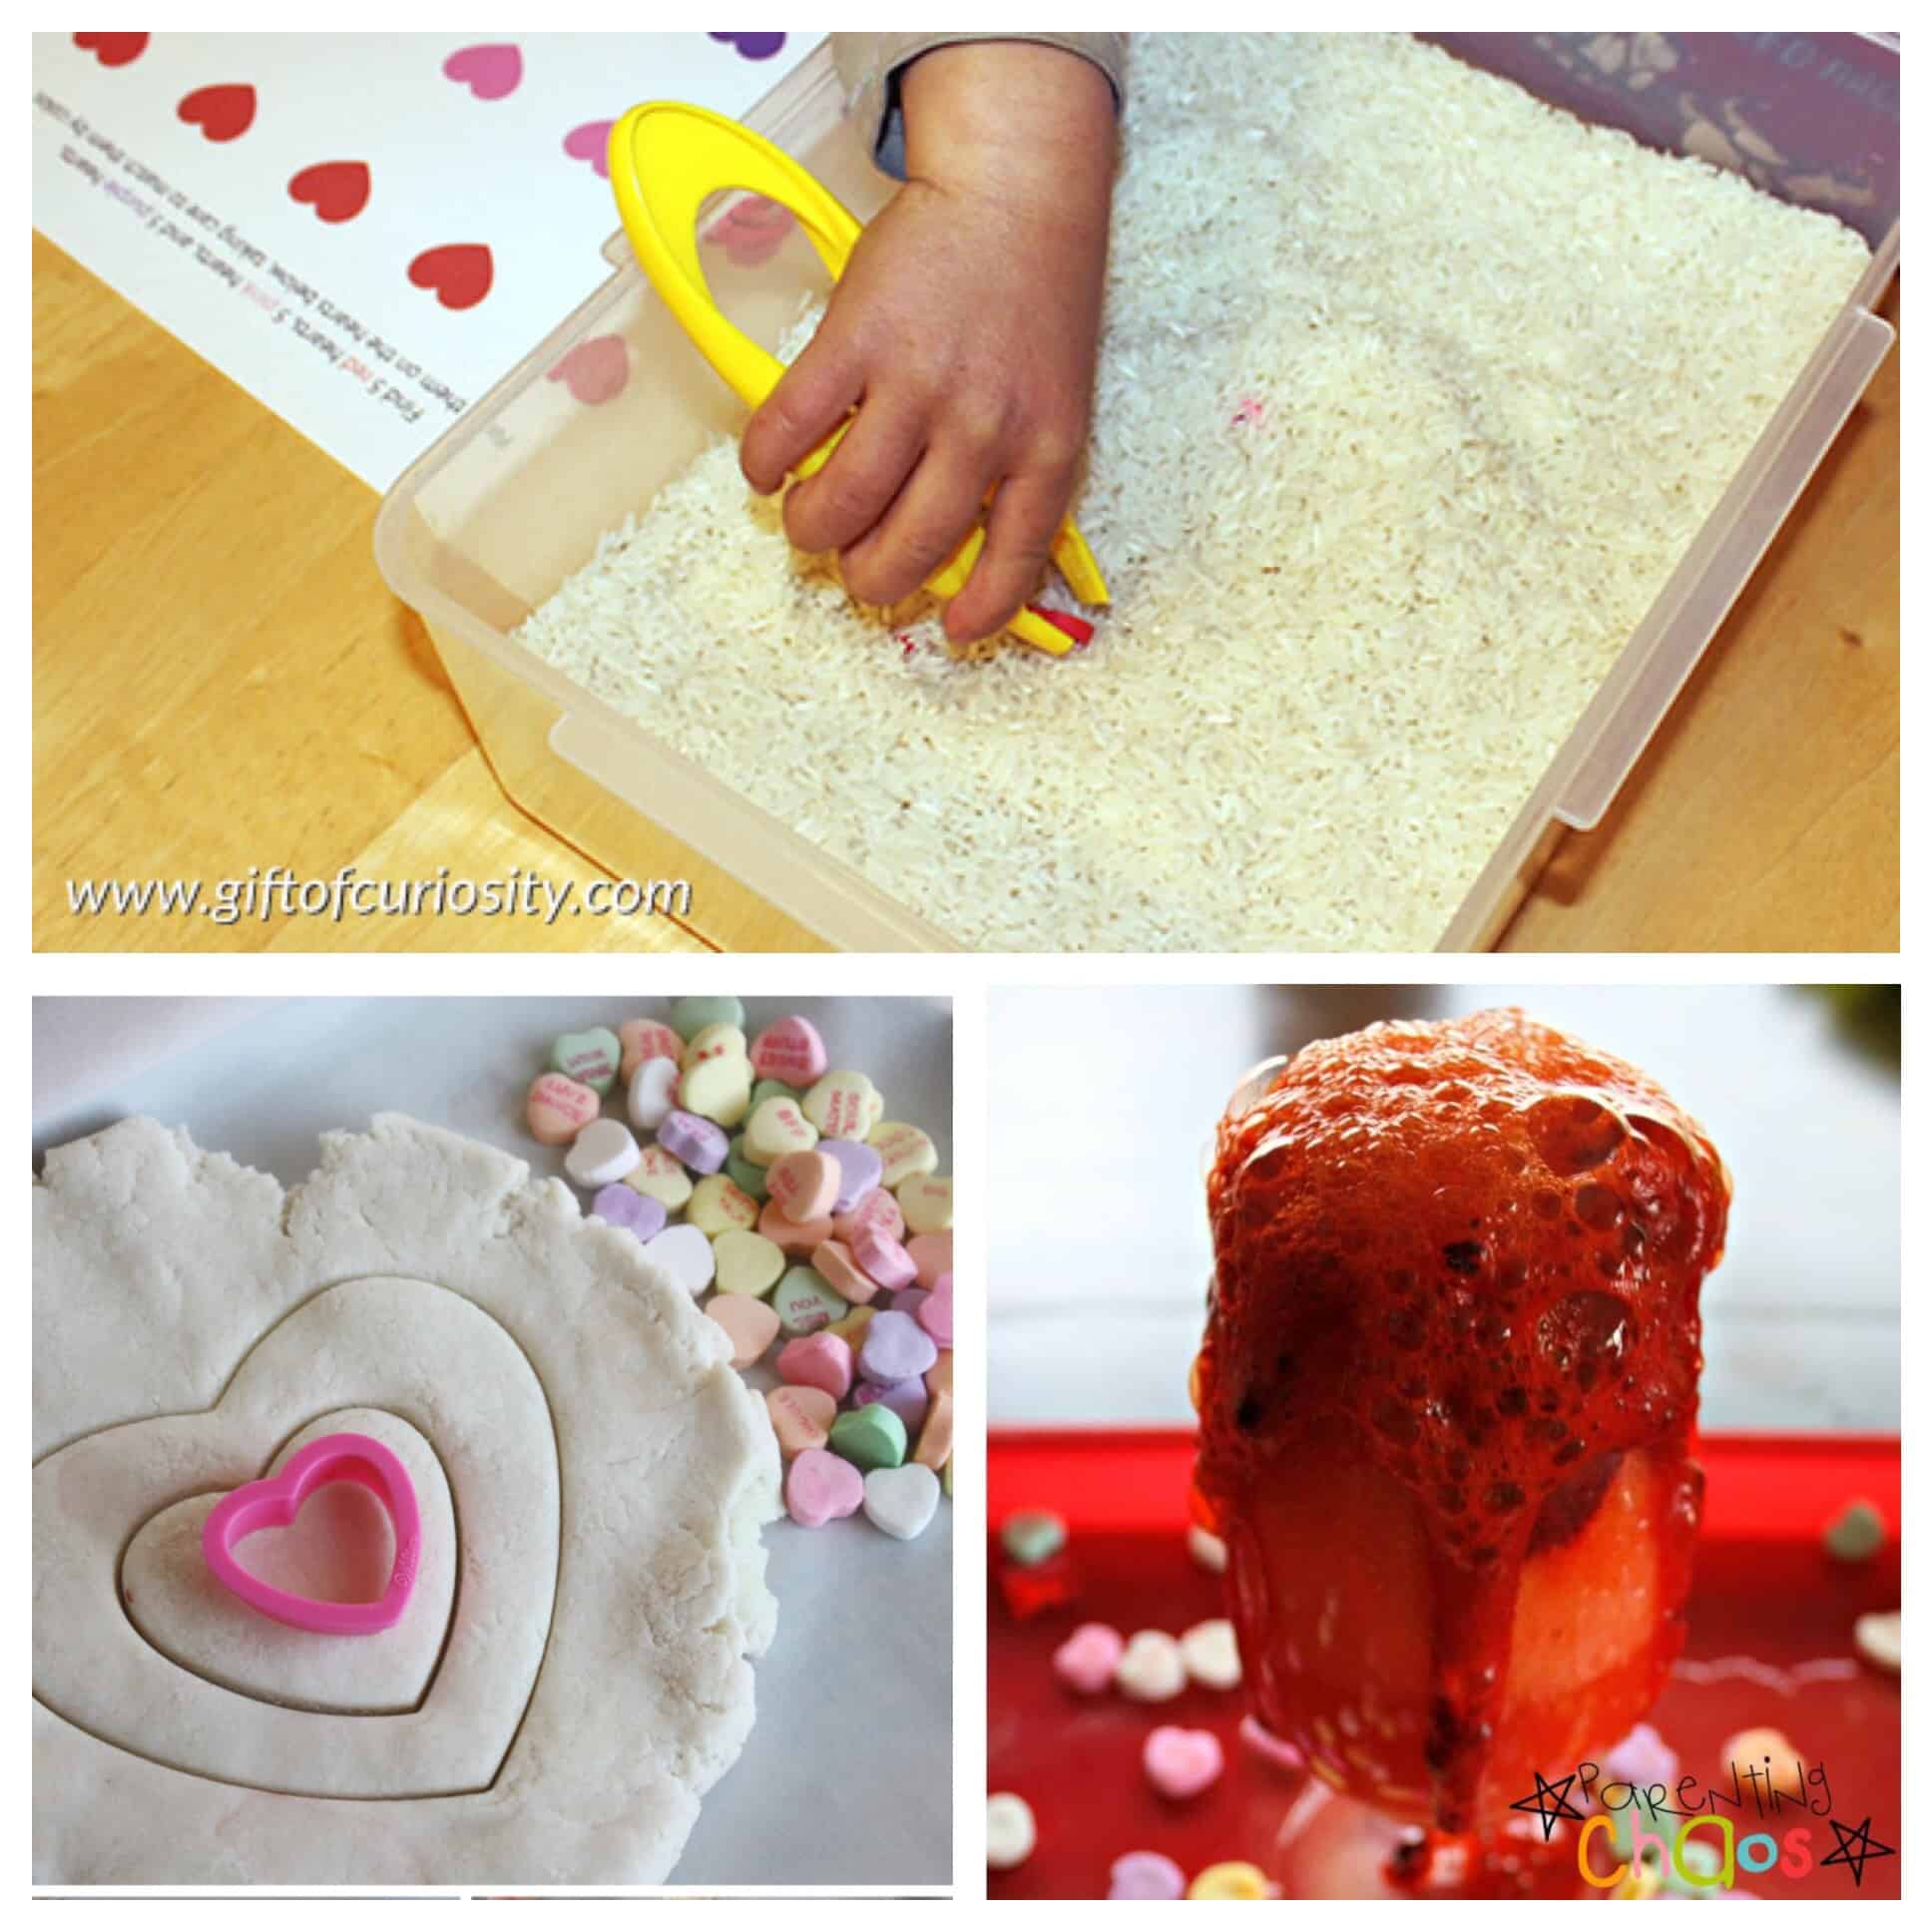 These activities using conversation hearts are perfect for a party, or for keeping the kids busy and learning at home!